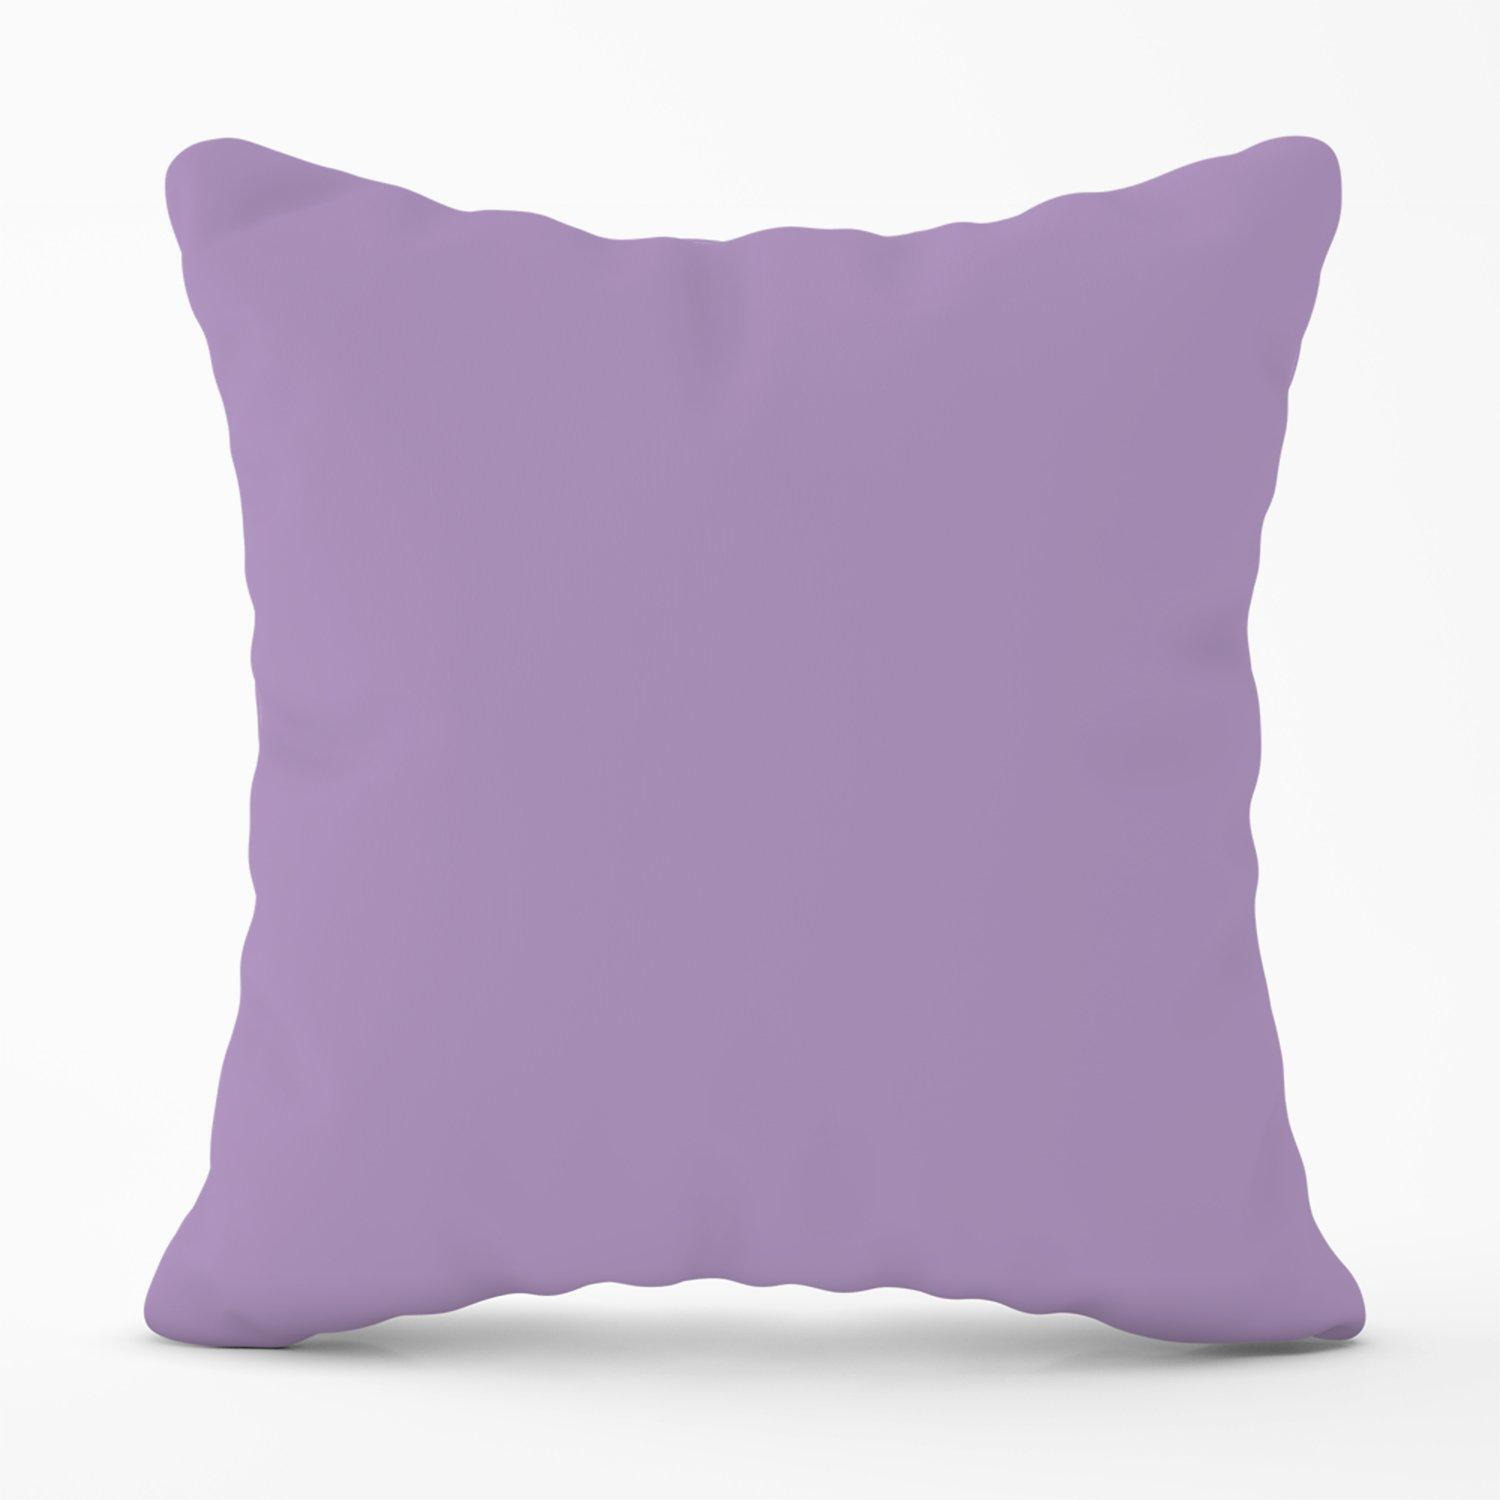 Dusty Lavender Outdoor Cushion - image 1